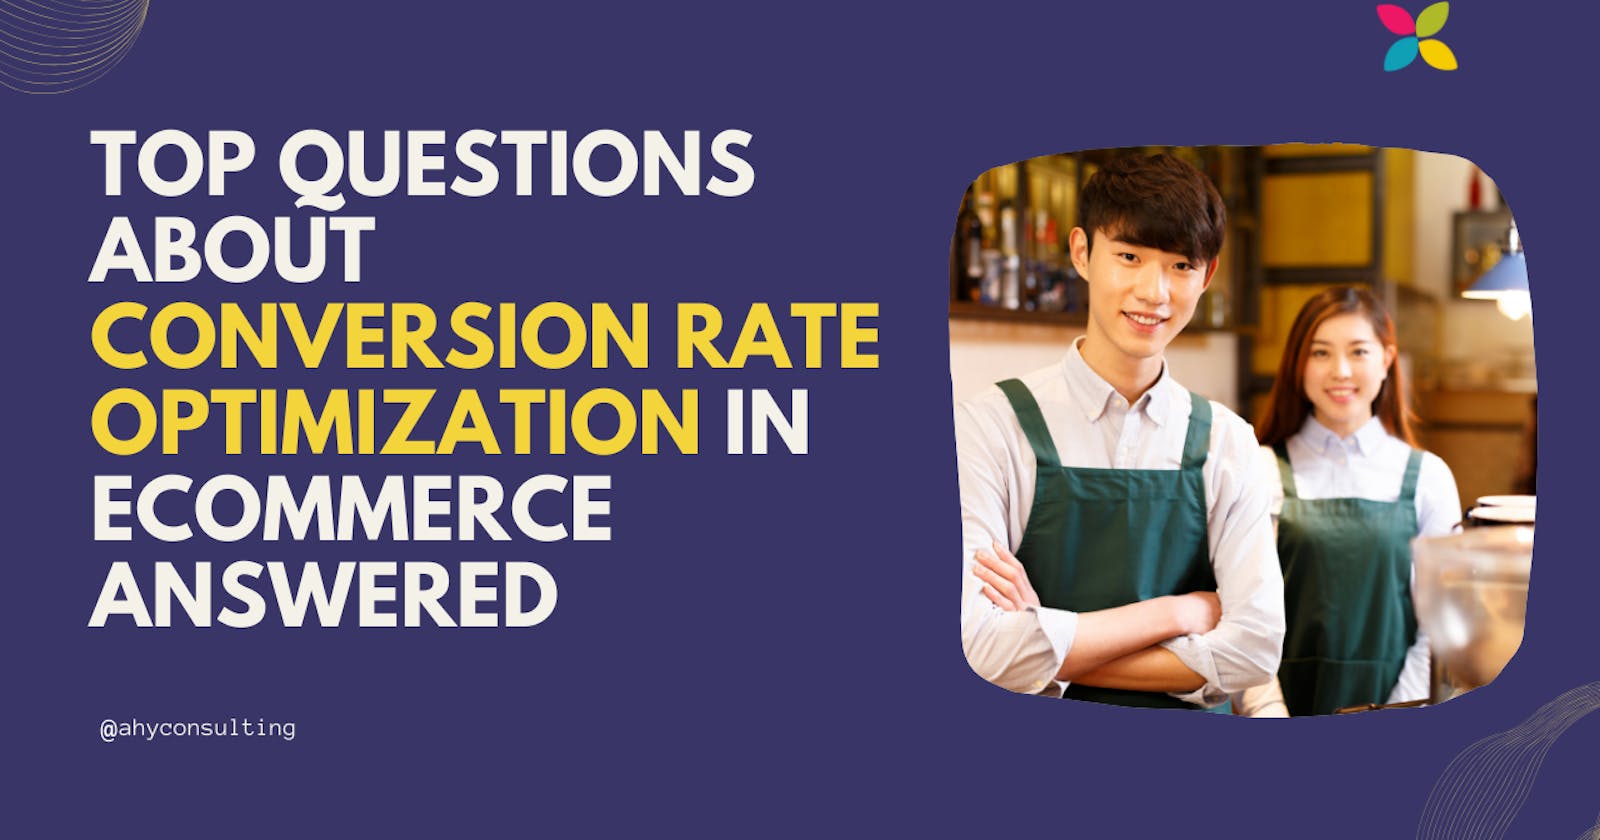 Top Questions About Conversion Rate Optimization in eCommerce Answered